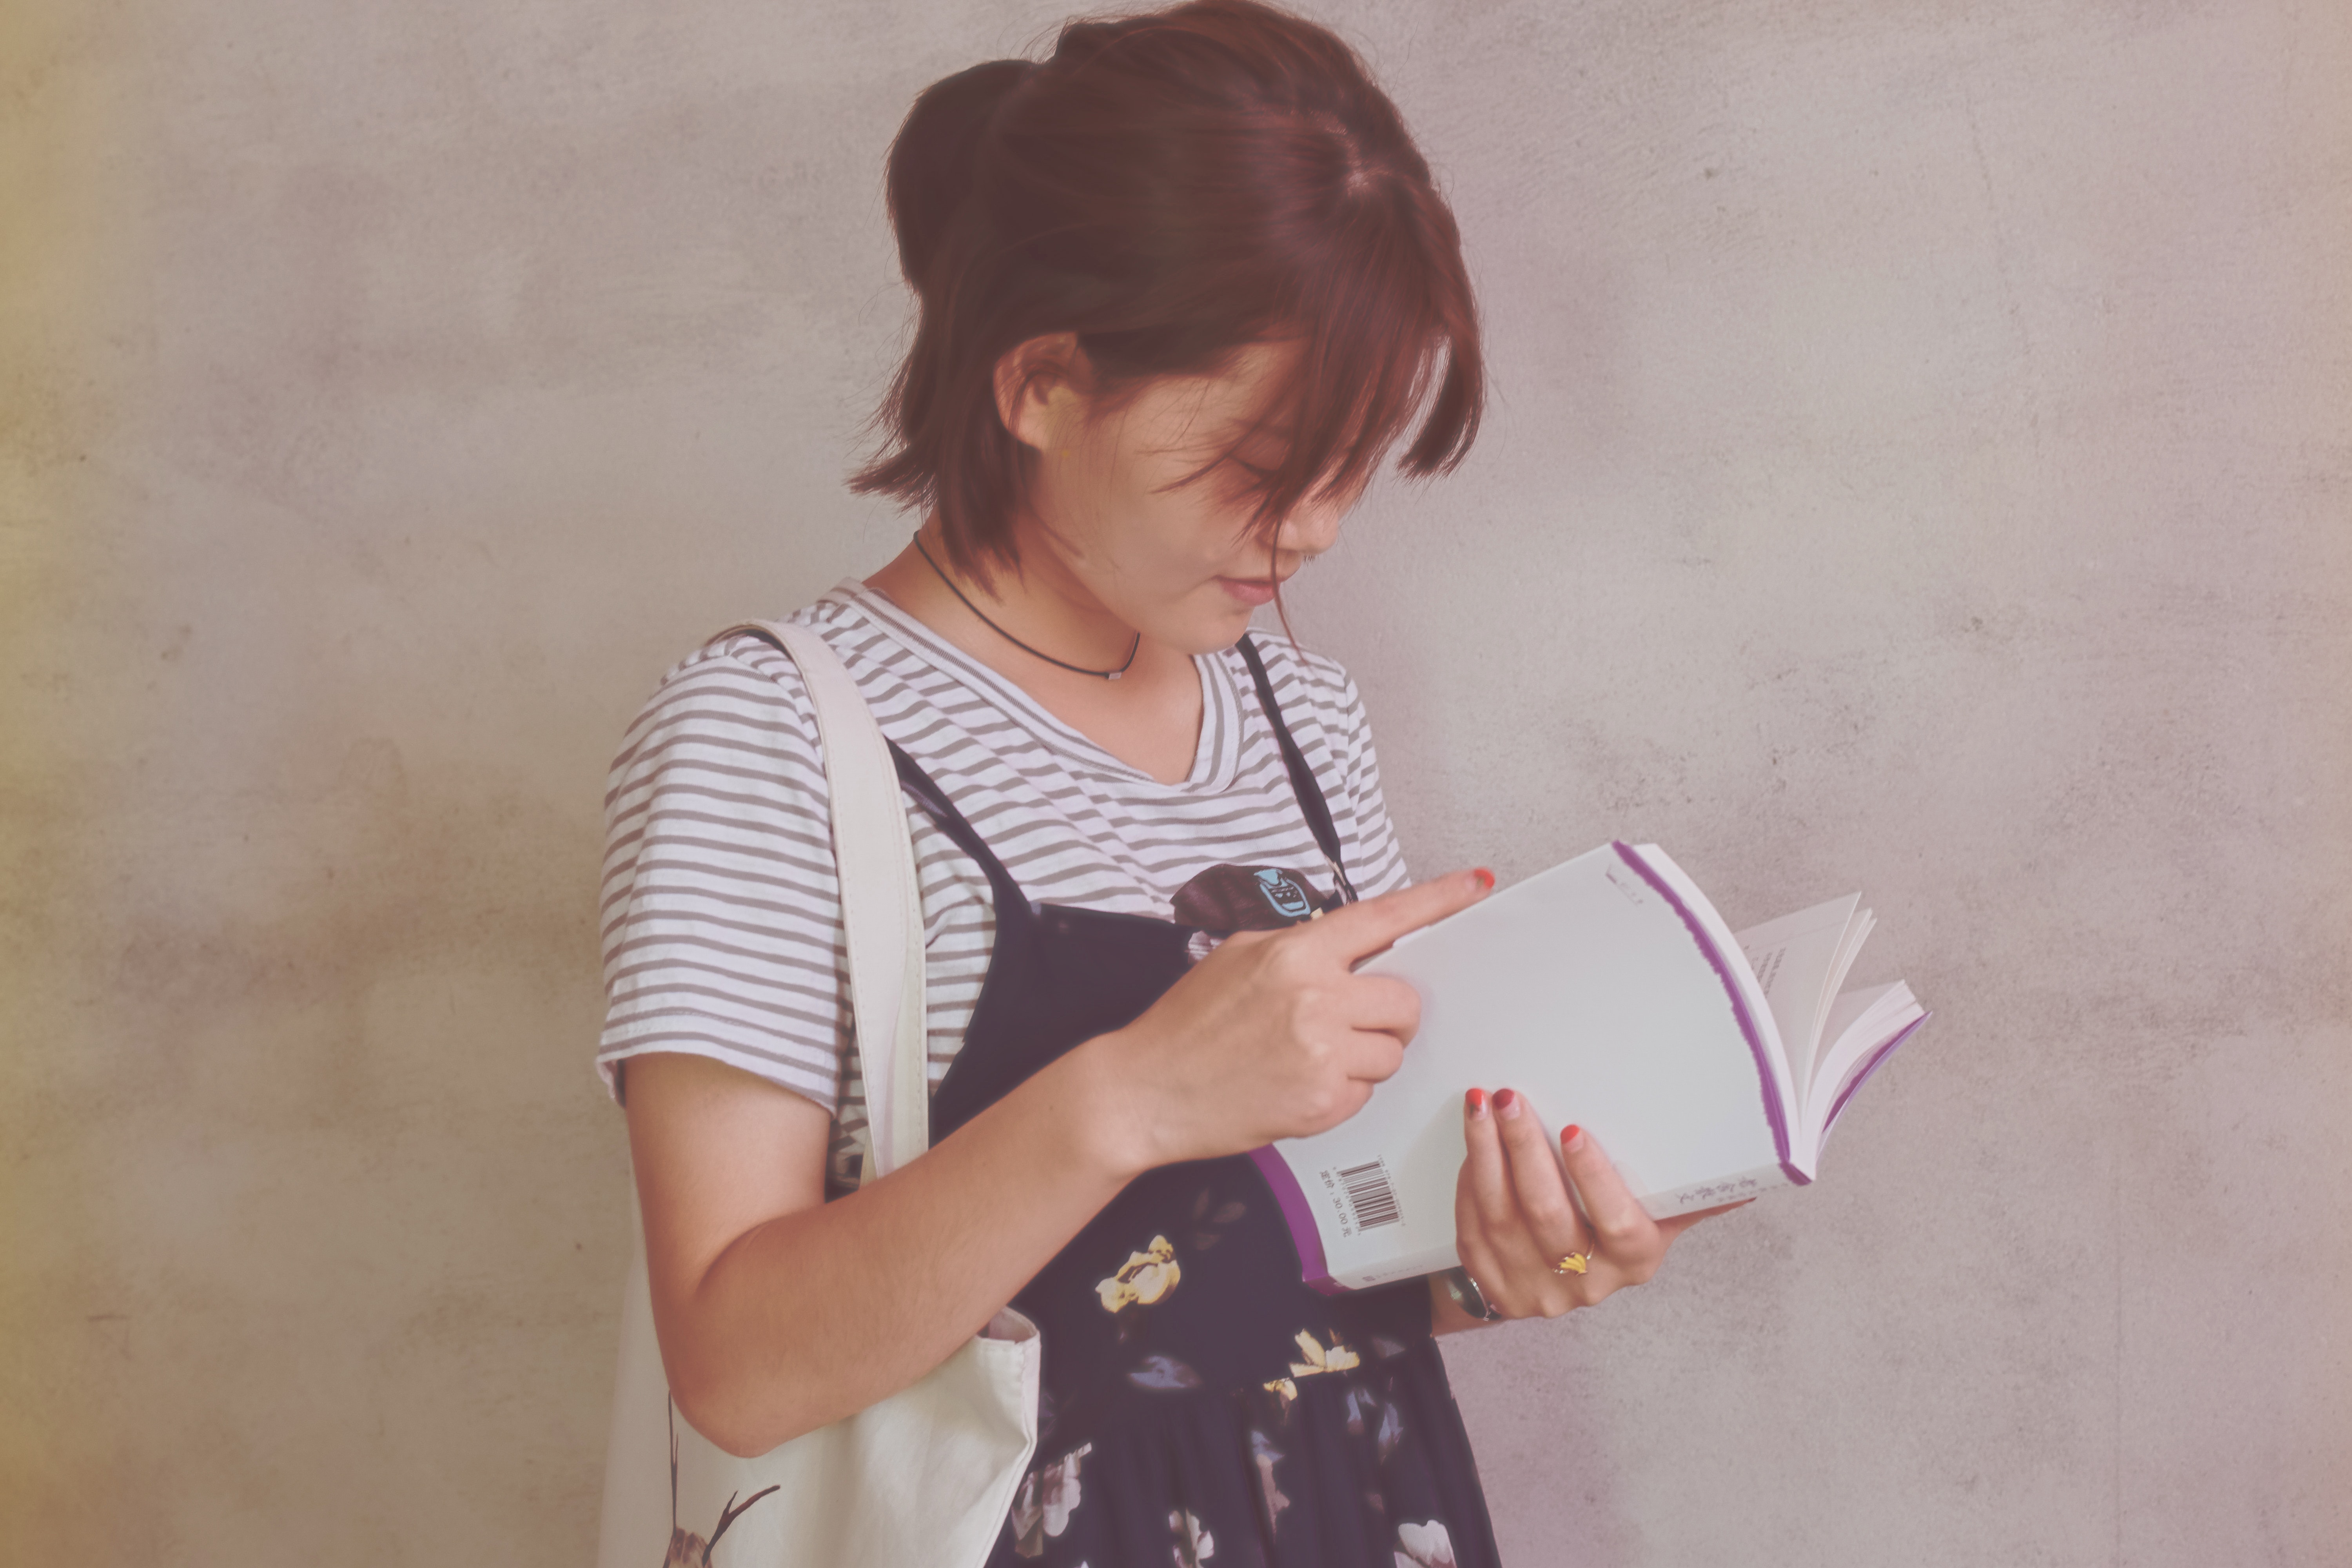 Woman Holding White Book, Adolescent, Smile, Young, Woman, HQ Photo